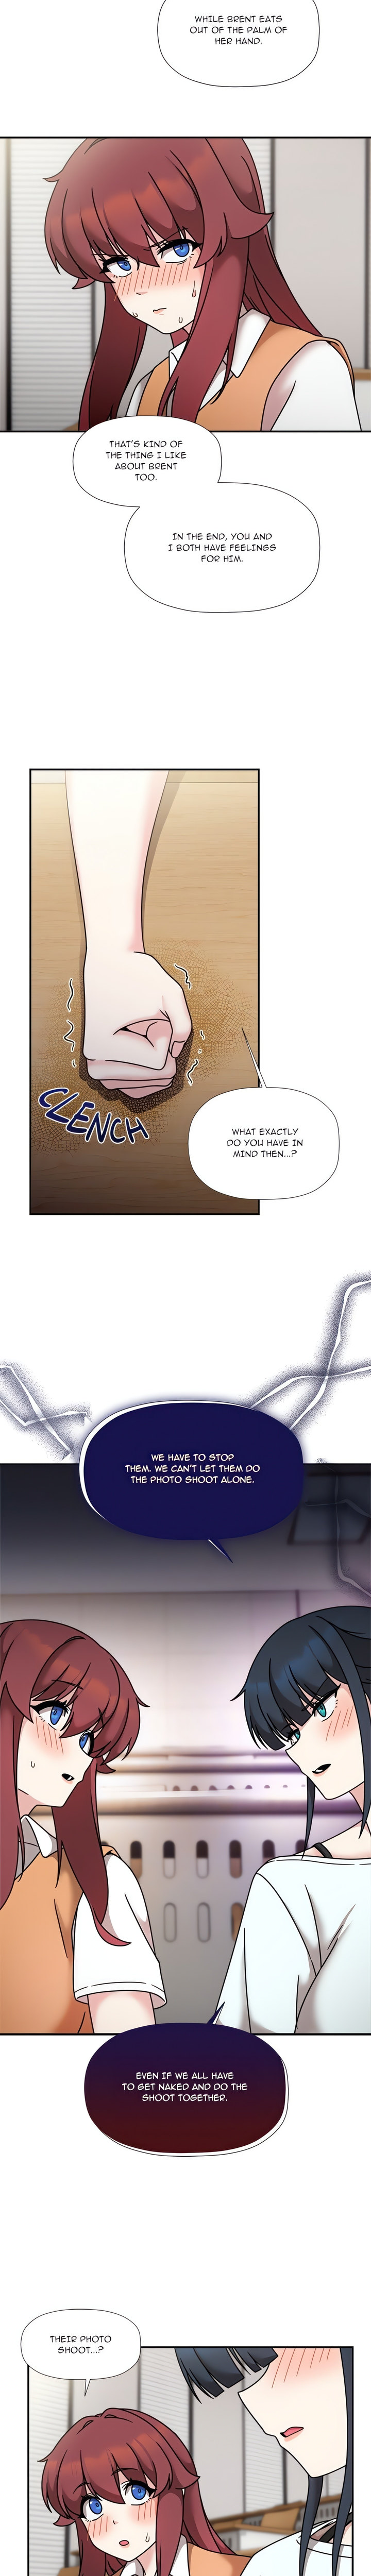 #Follow Me - Chapter 47 Page 6